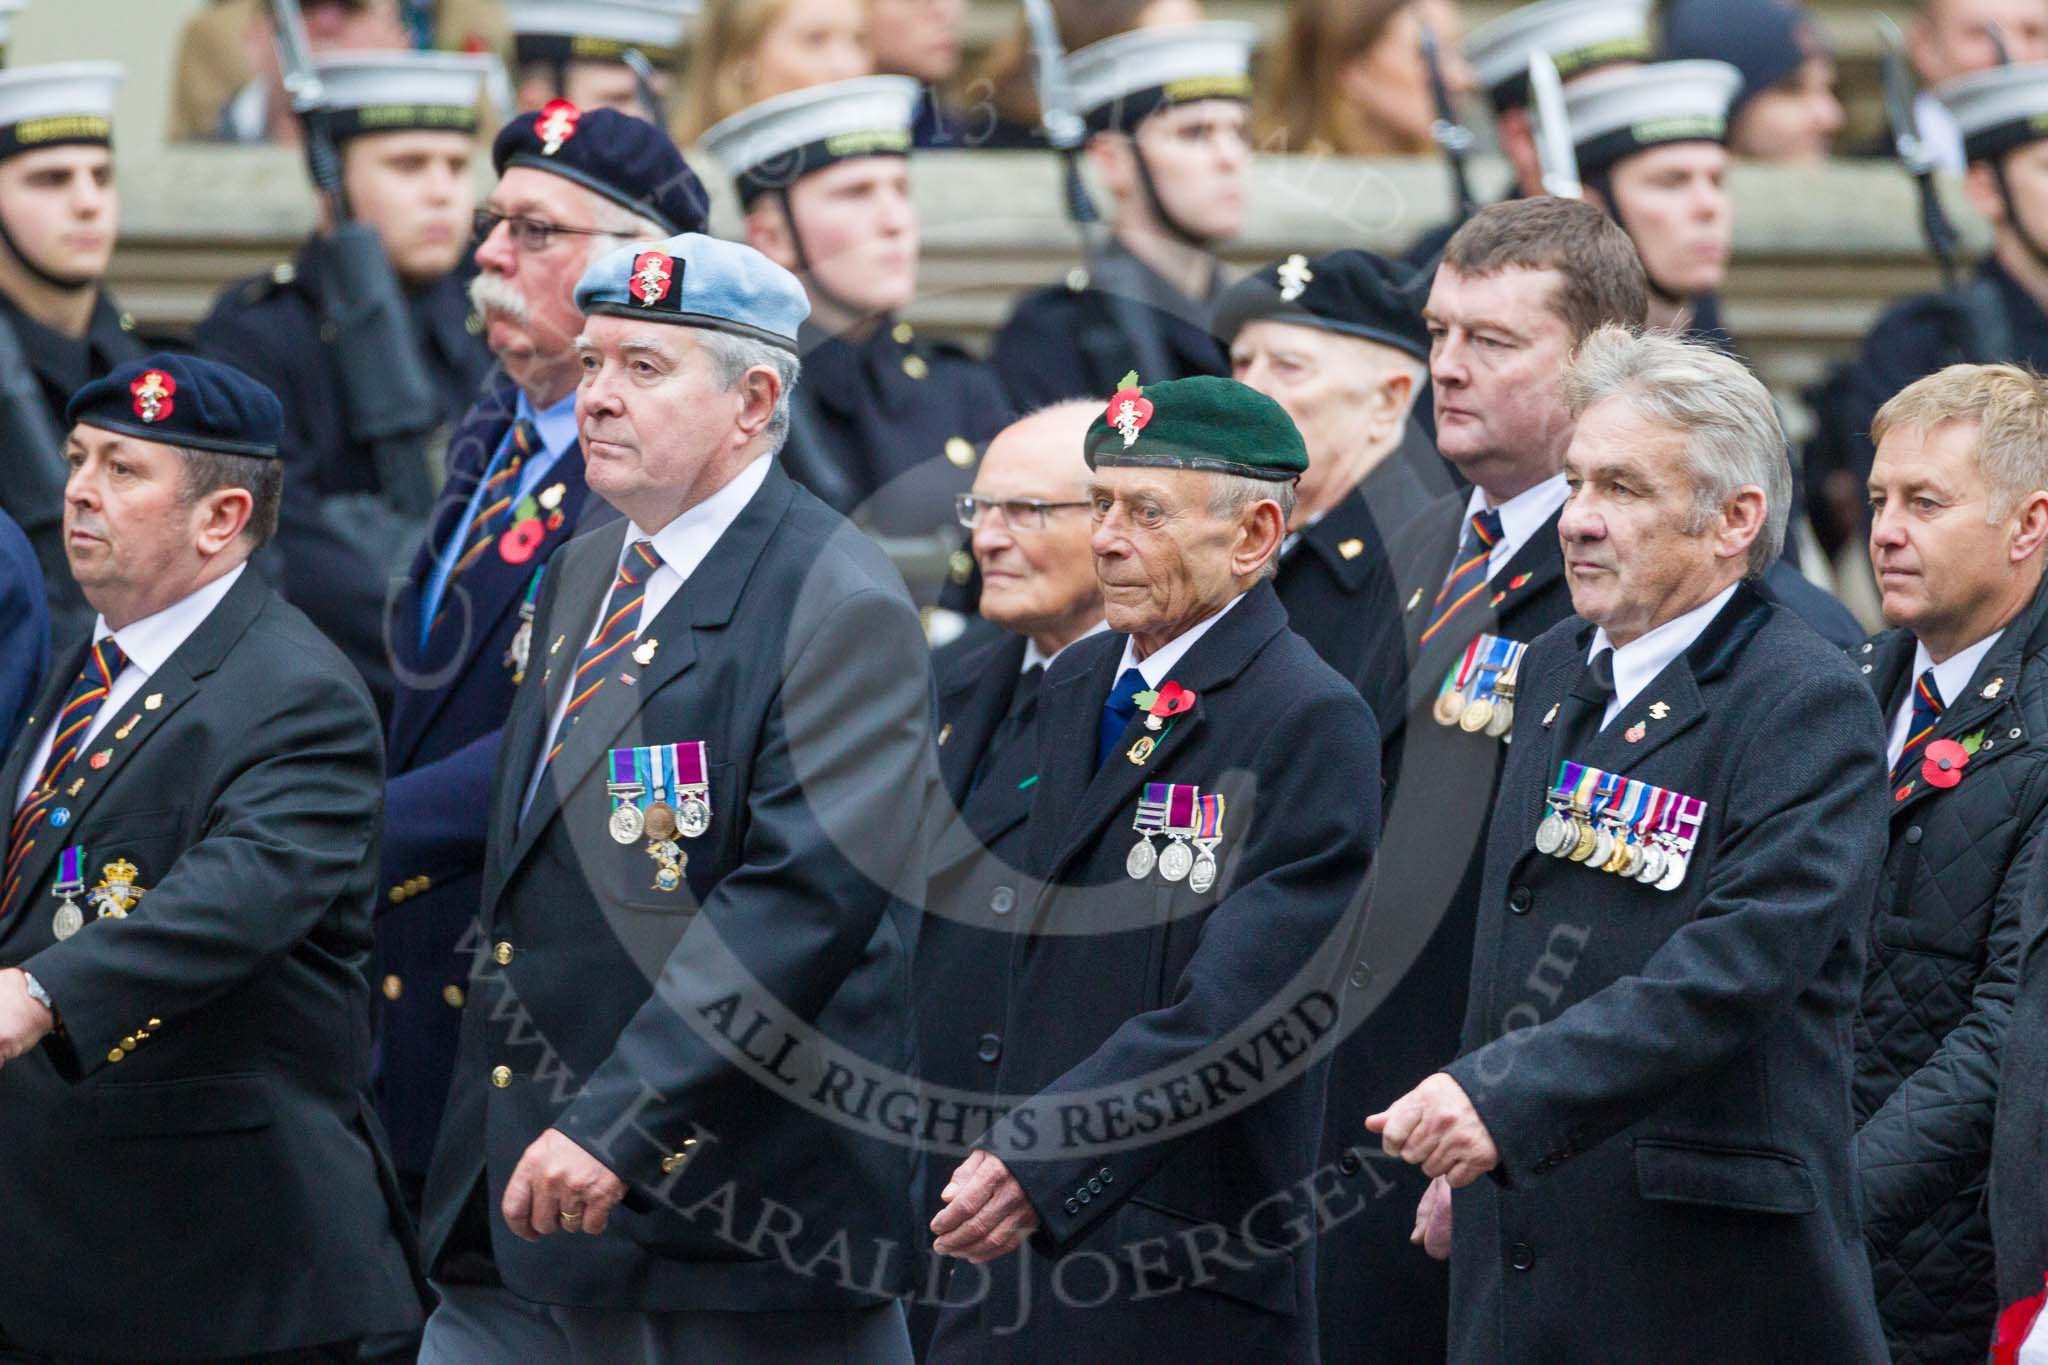 Remembrance Sunday at the Cenotaph 2015: Group B15, Royal Electrical & Mechanical Engineers Association.
Cenotaph, Whitehall, London SW1,
London,
Greater London,
United Kingdom,
on 08 November 2015 at 11:39, image #122